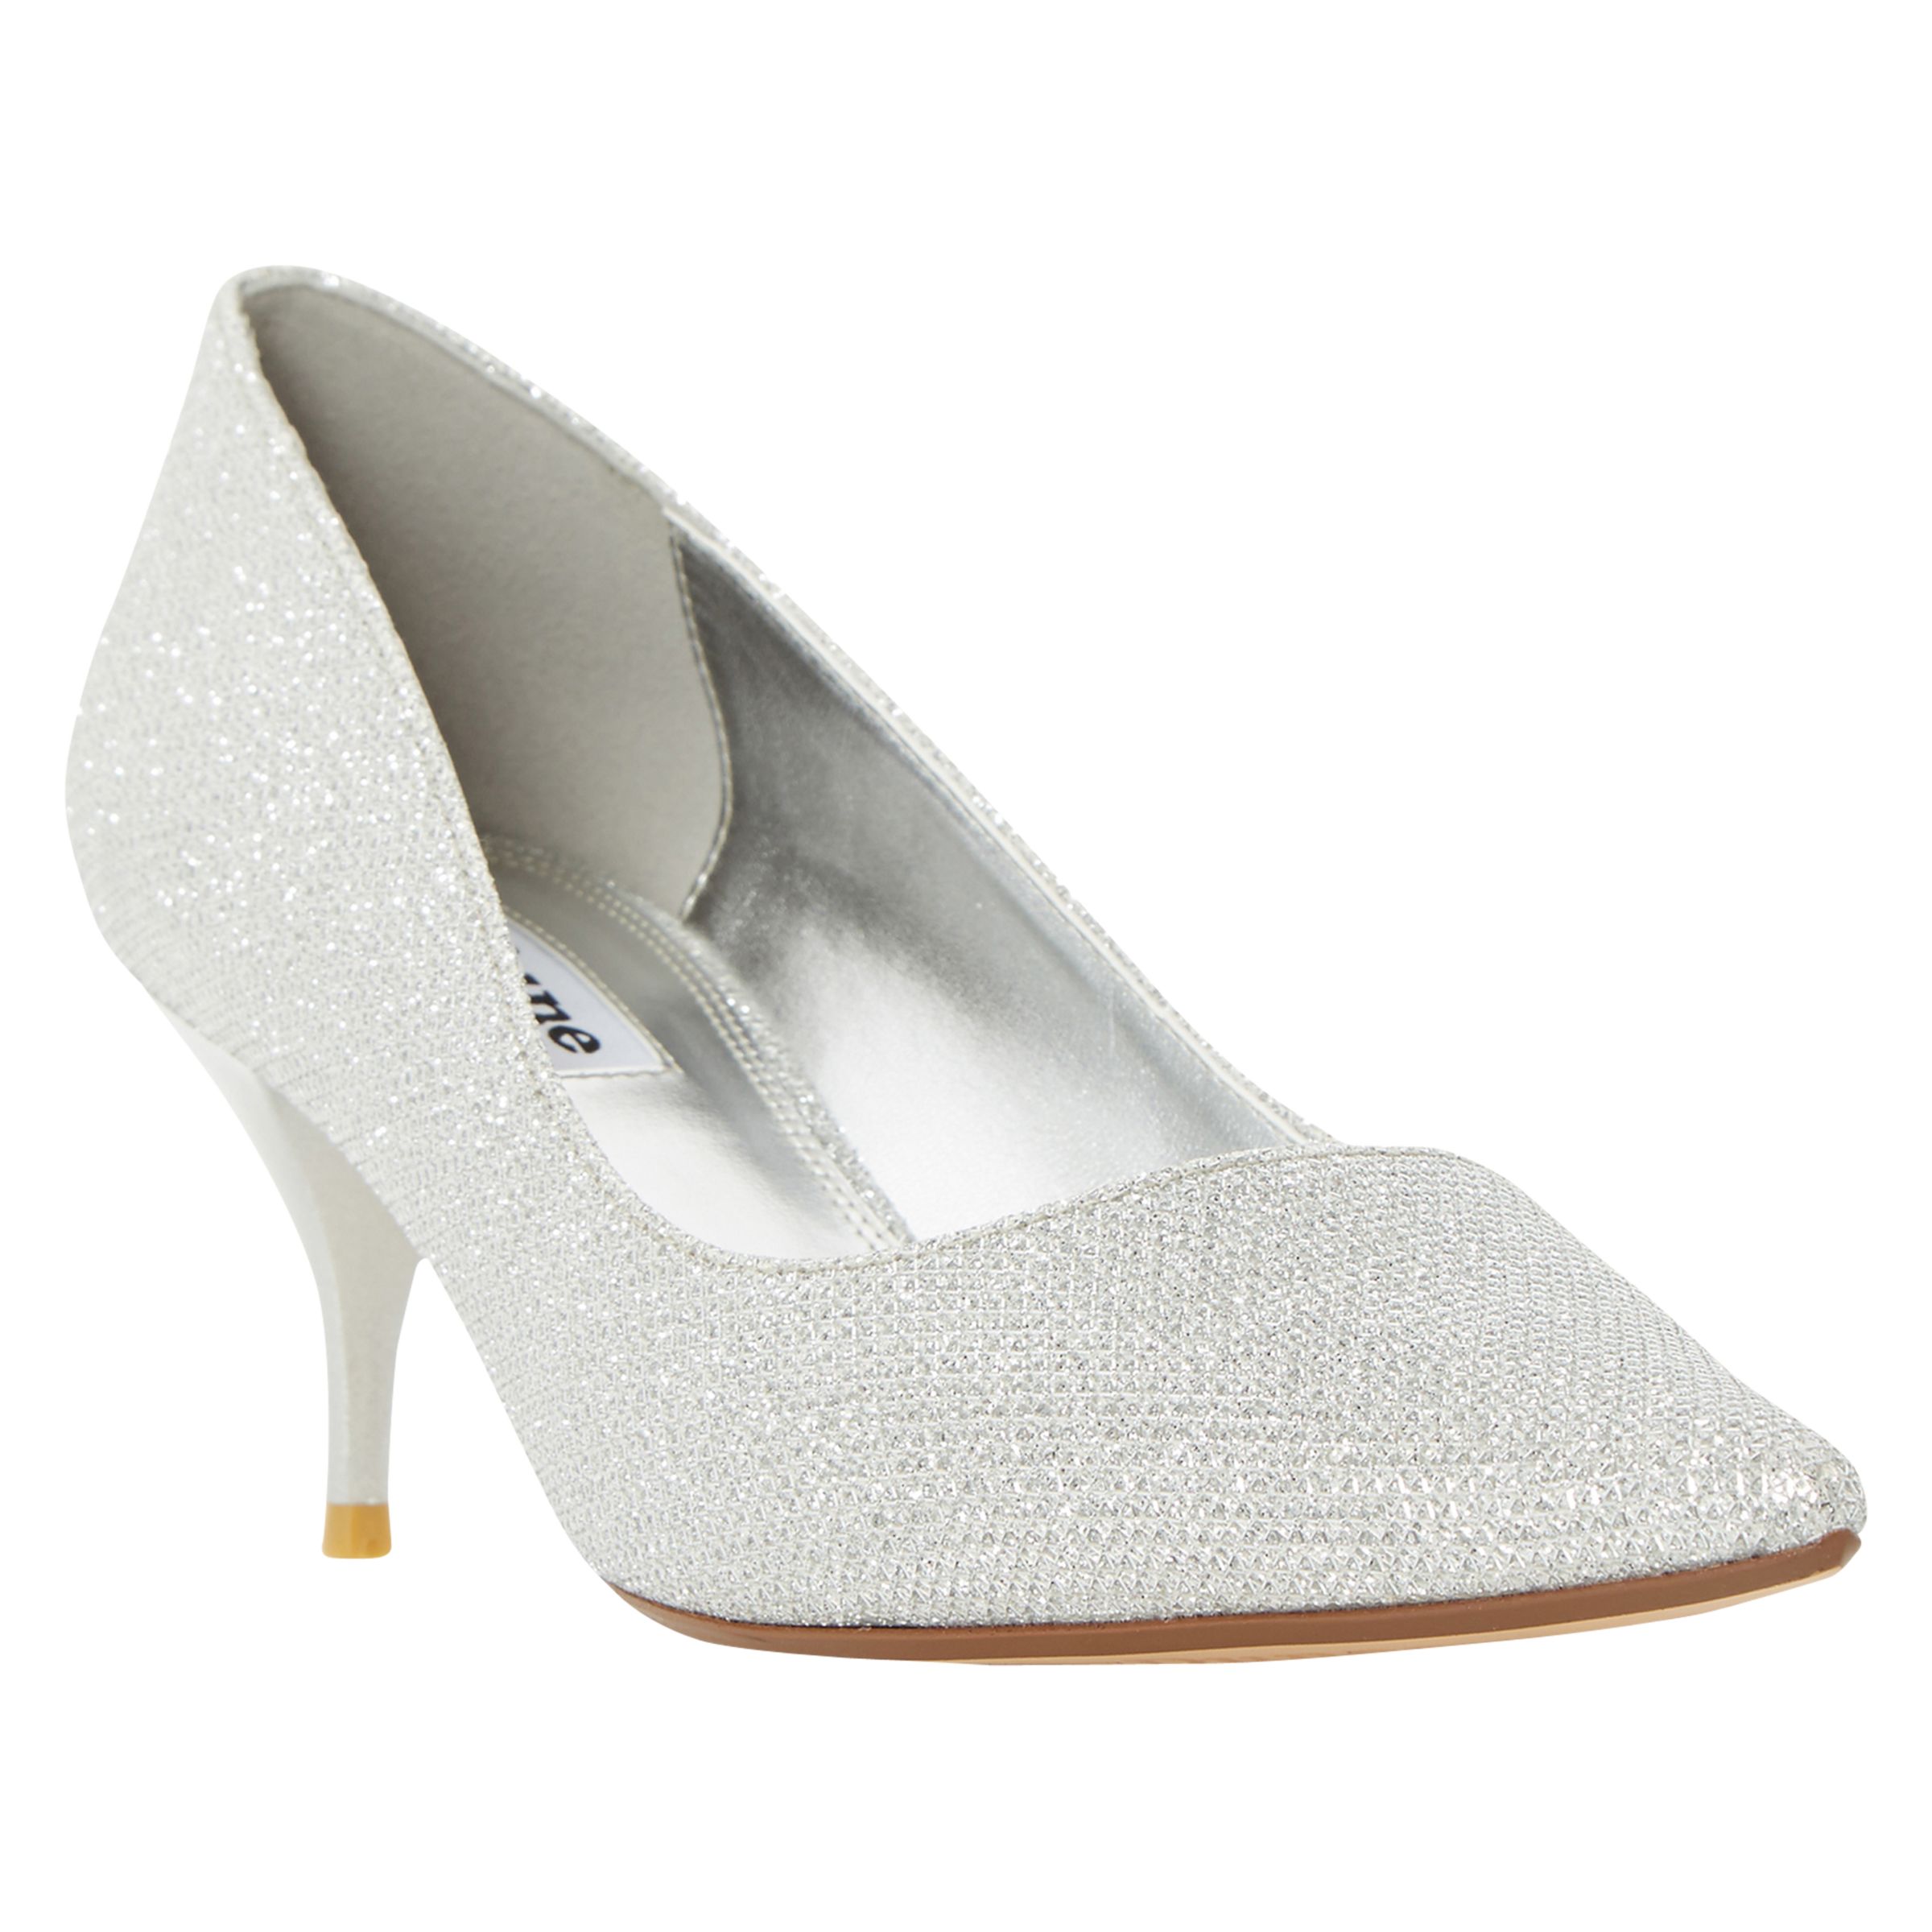 Dune Allera Mid Heeled Stiletto Court Shoes, Silver at John Lewis ...